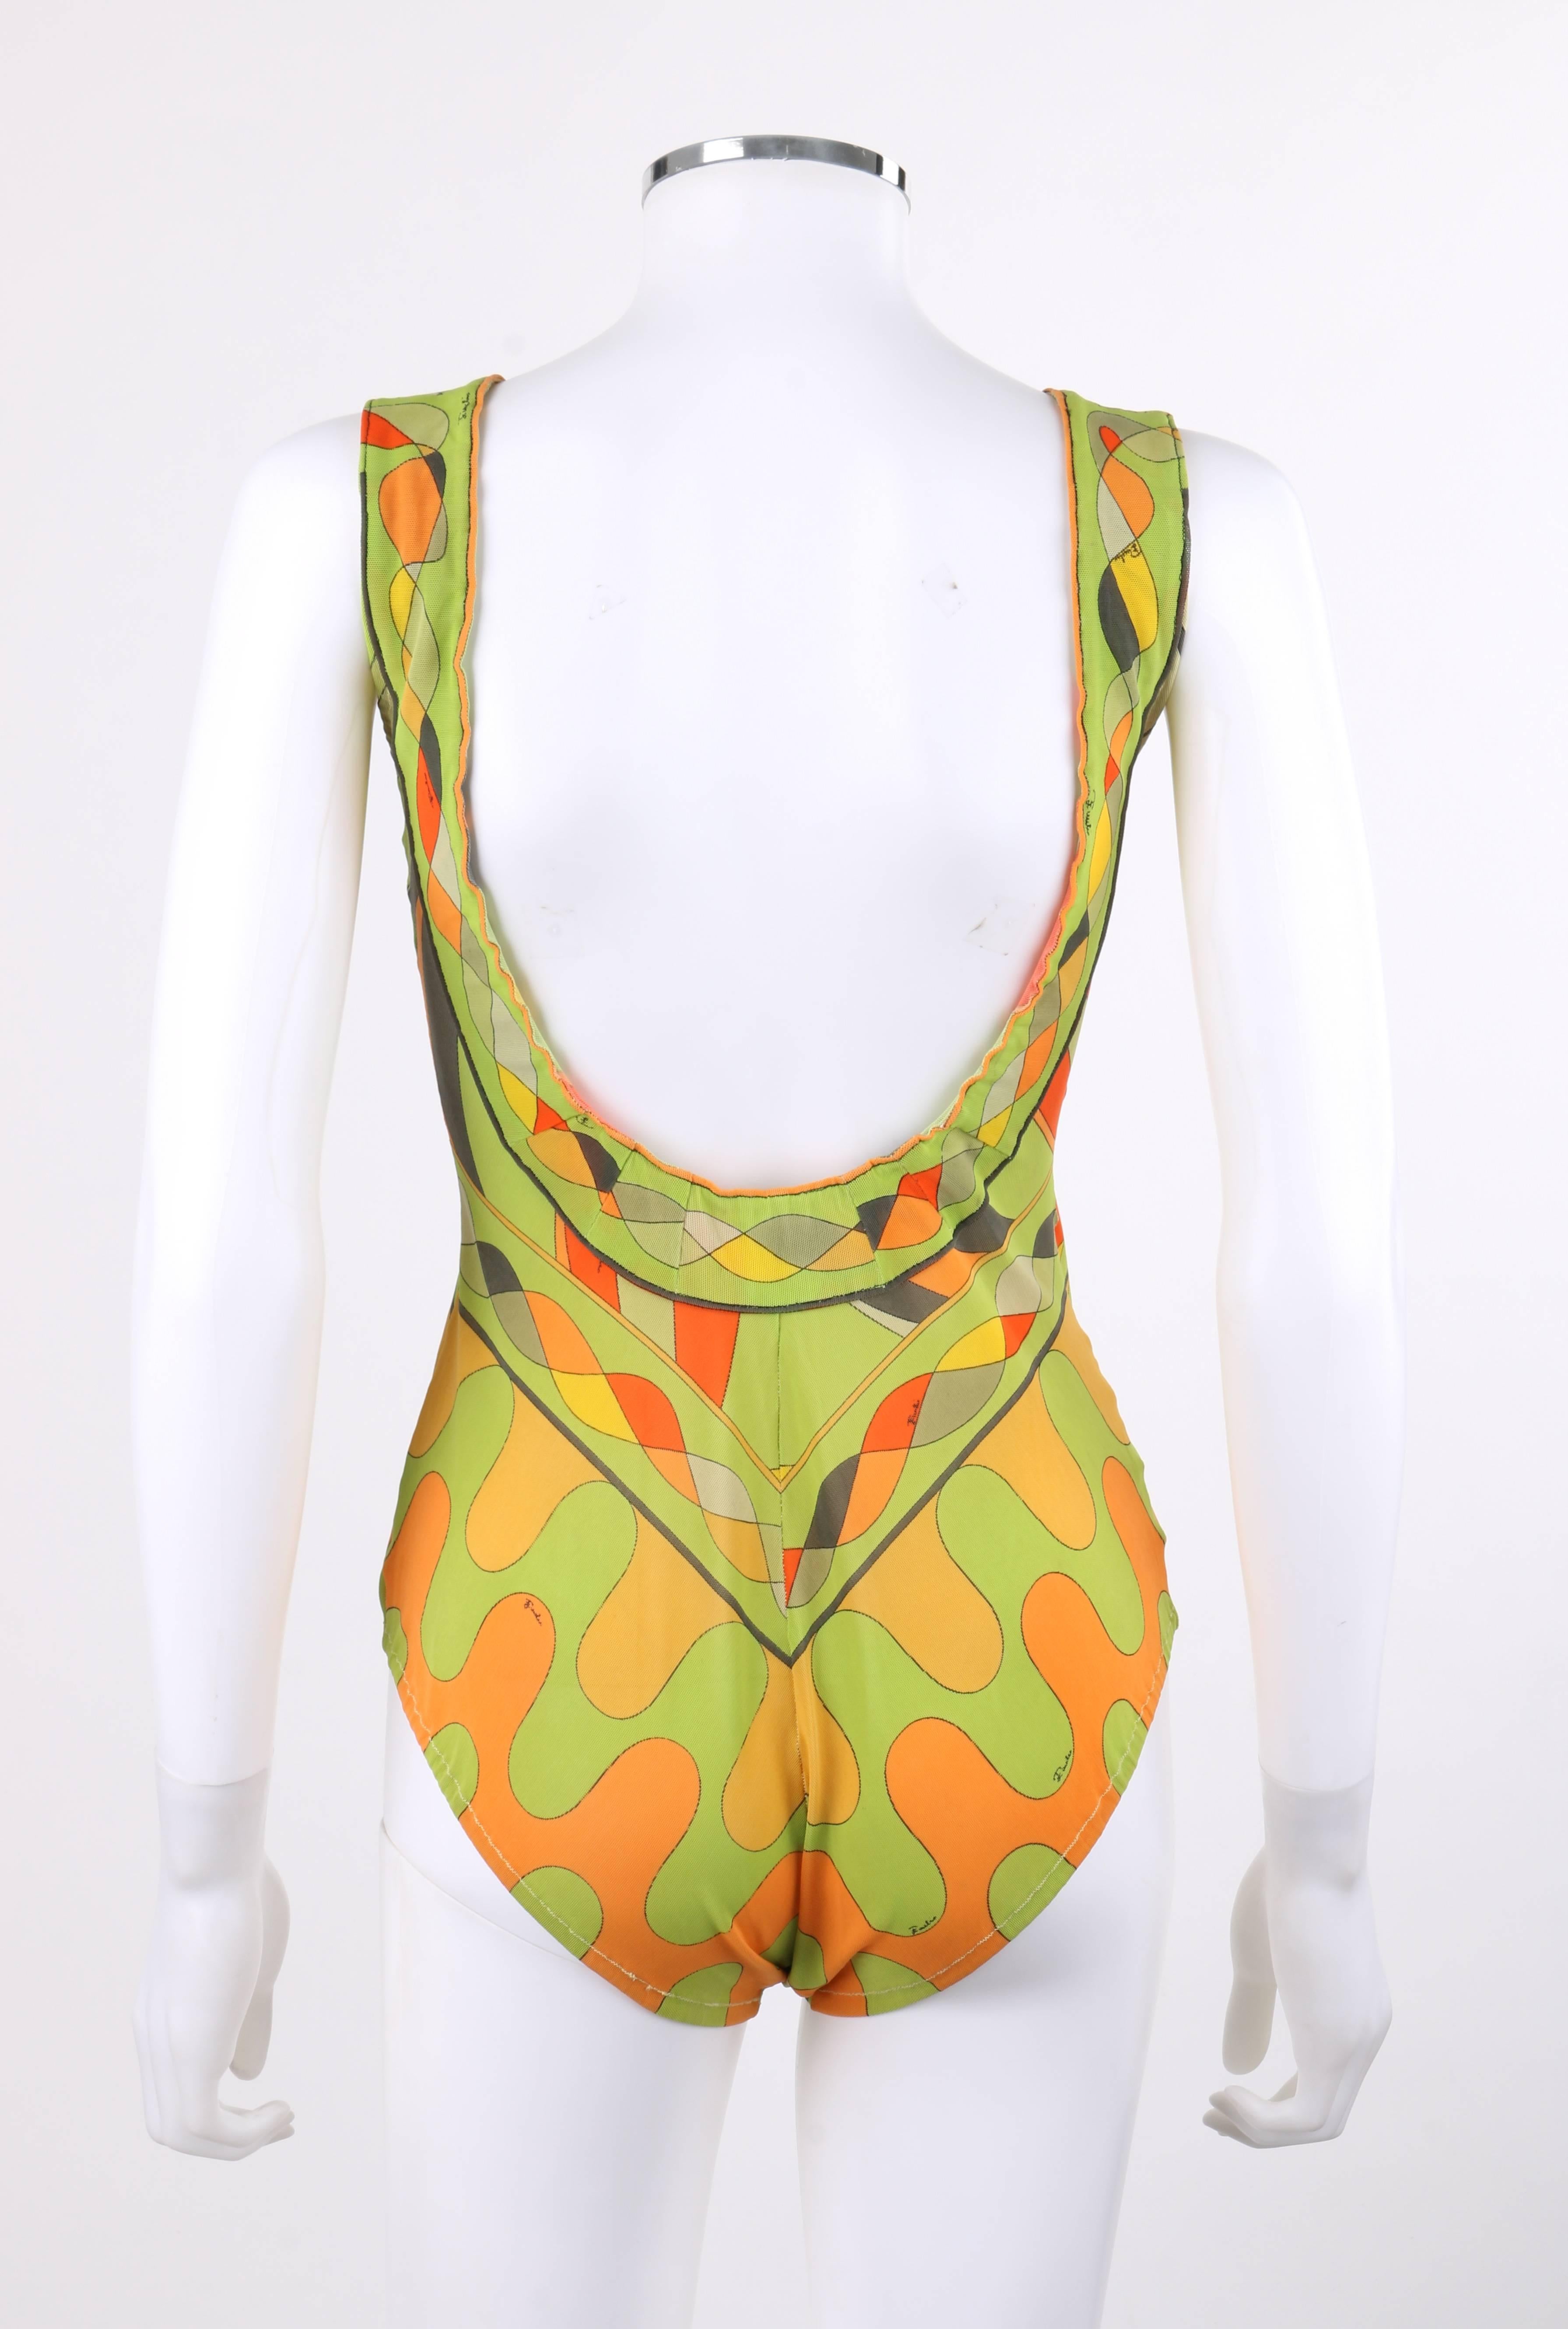 pucci one piece bathing suit